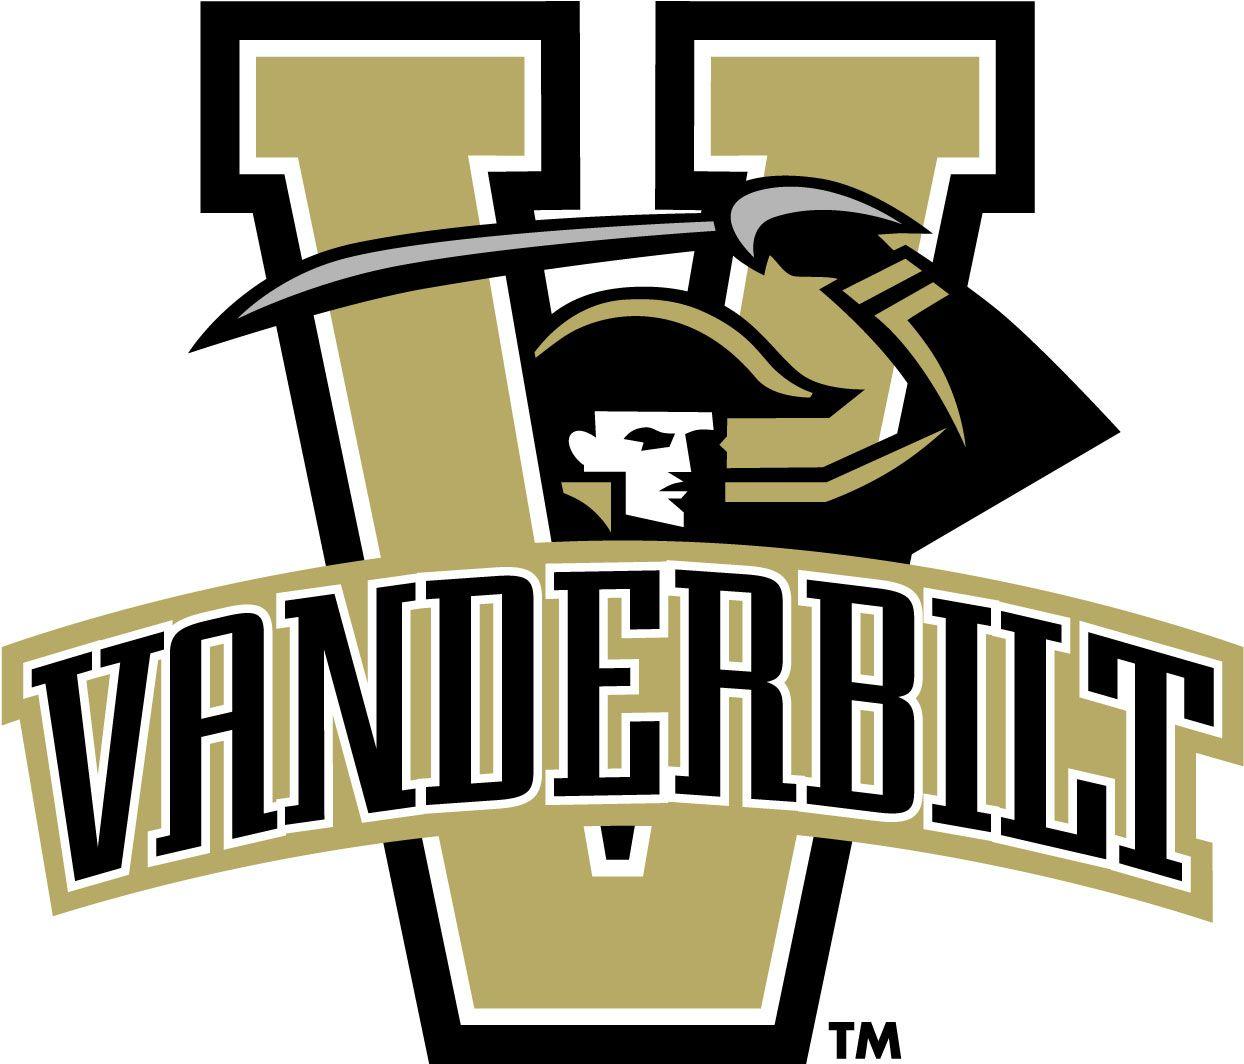 Vanderbilt University Commodores SEC east. Southern and proud of it